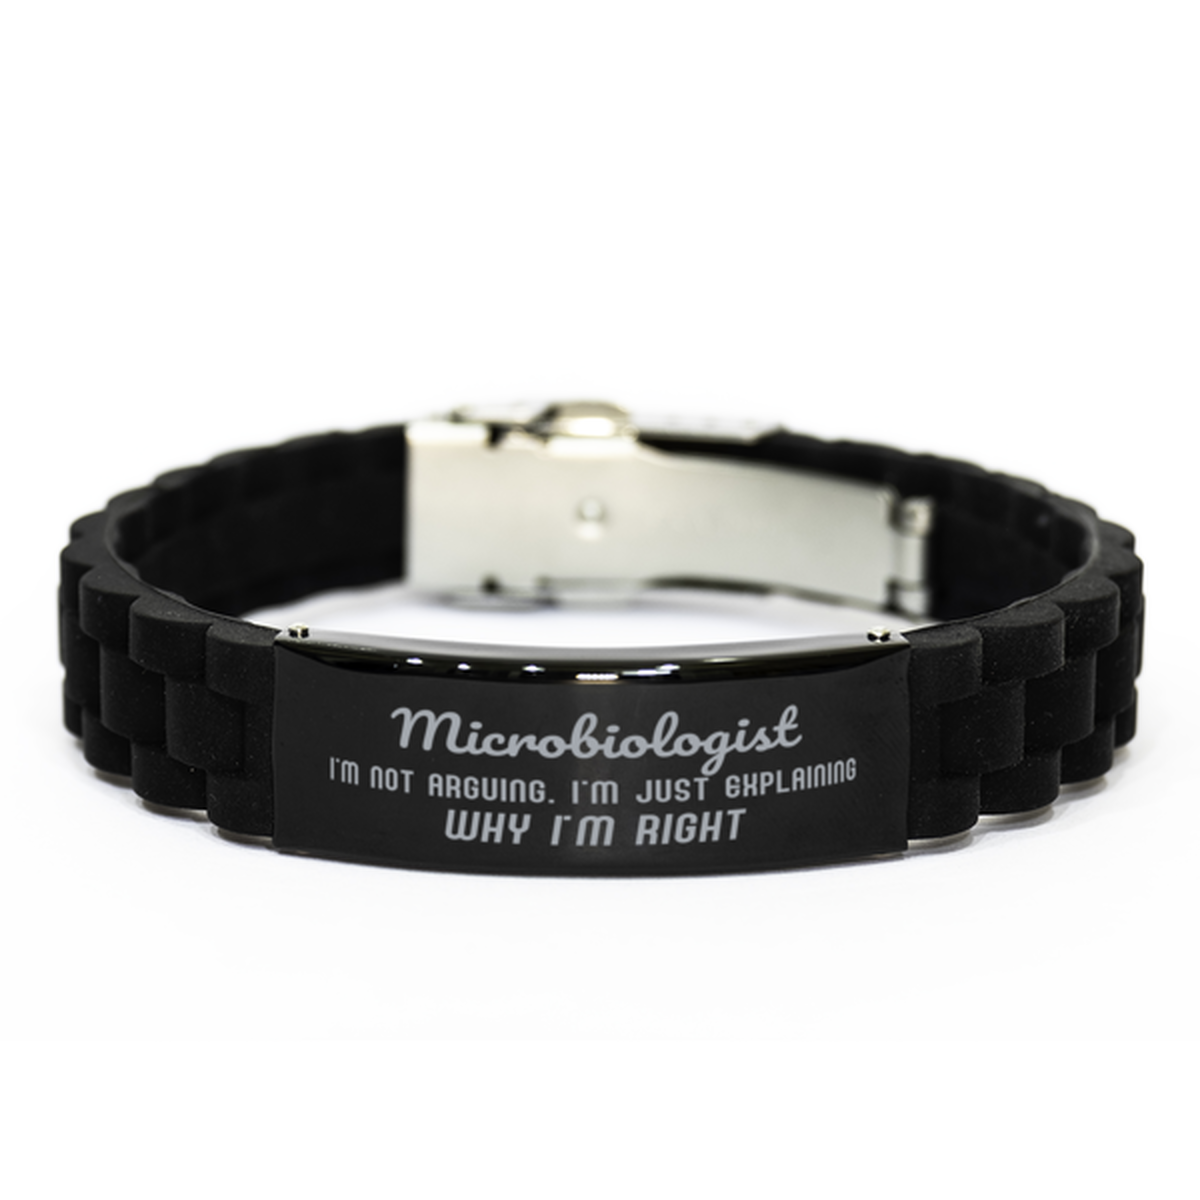 Microbiologist I'm not Arguing. I'm Just Explaining Why I'm RIGHT Black Glidelock Clasp Bracelet, Funny Saying Quote Microbiologist Gifts For Microbiologist Graduation Birthday Christmas Gifts for Men Women Coworker